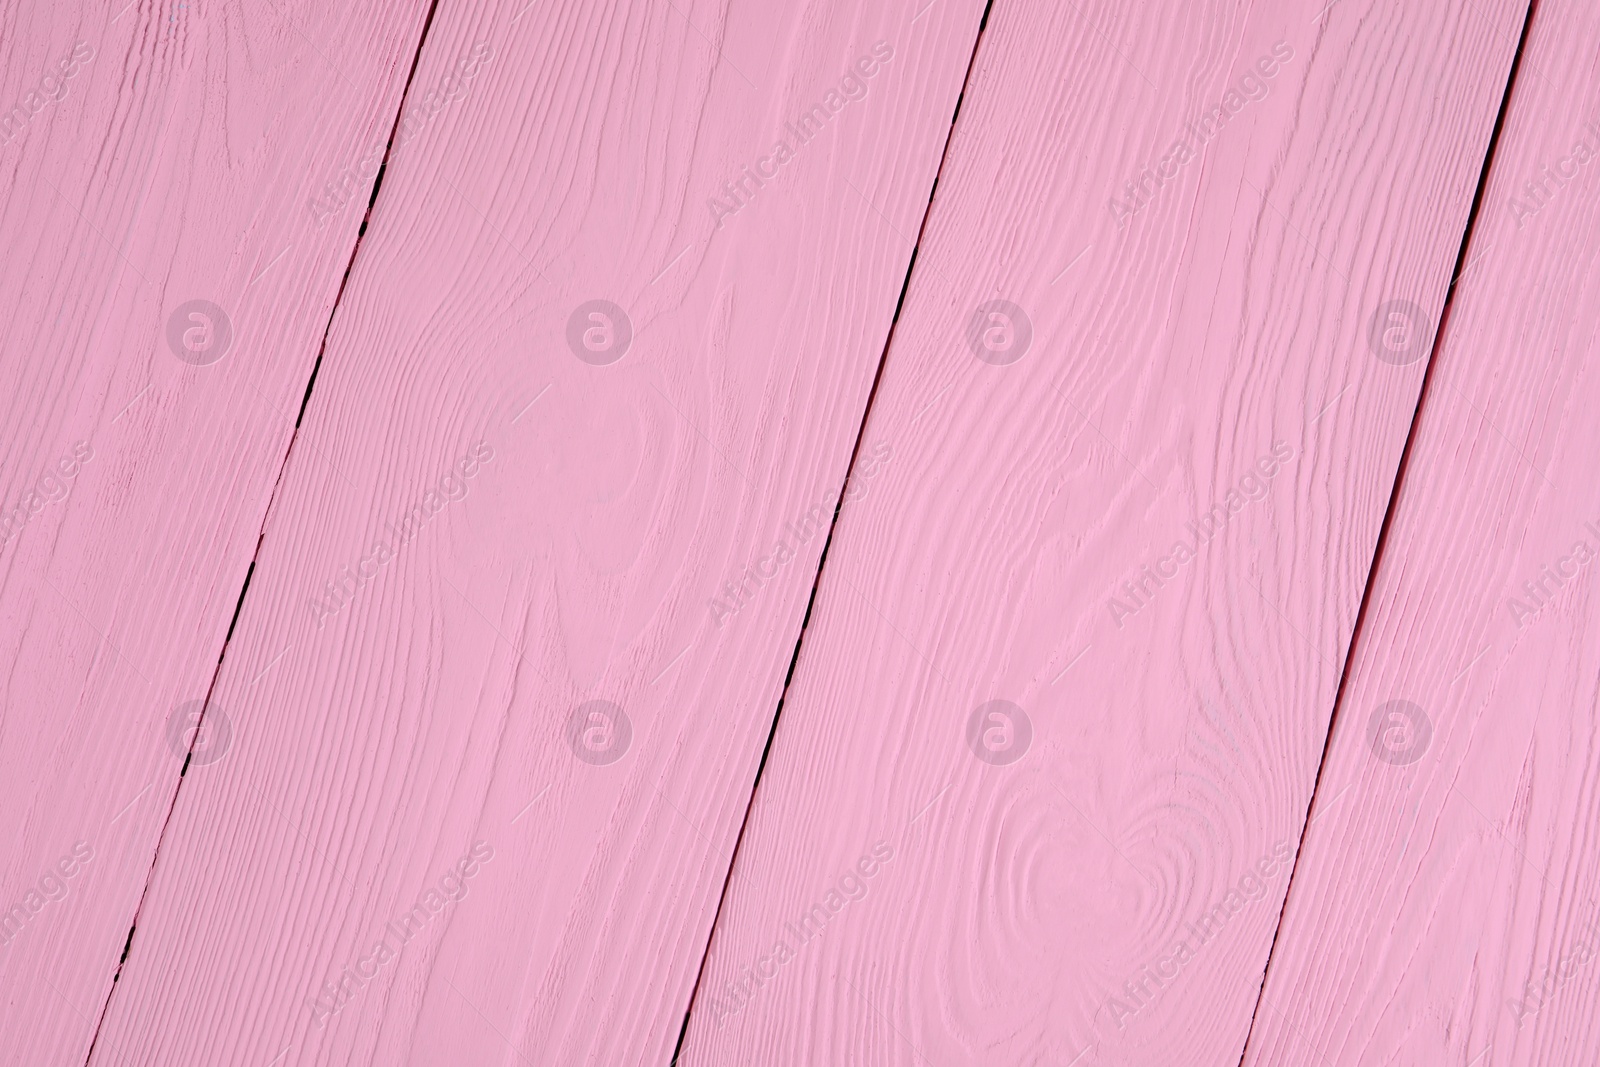 Photo of Texture of pink wooden surface as background, closeup